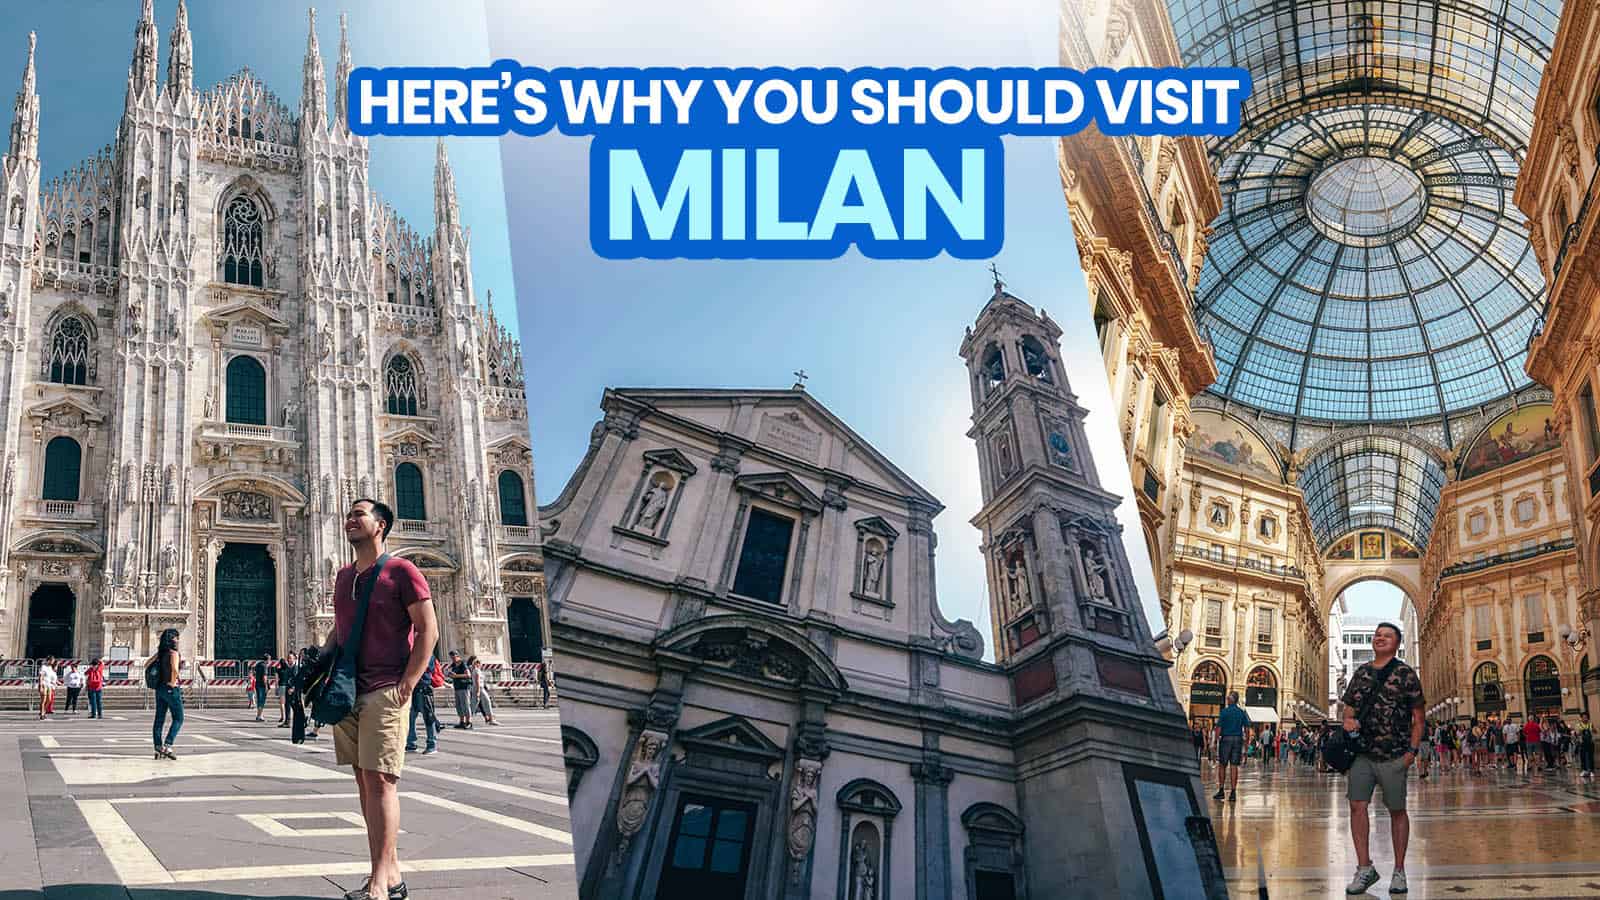 MILAN: 25 Best Things to Do & Places to Visit